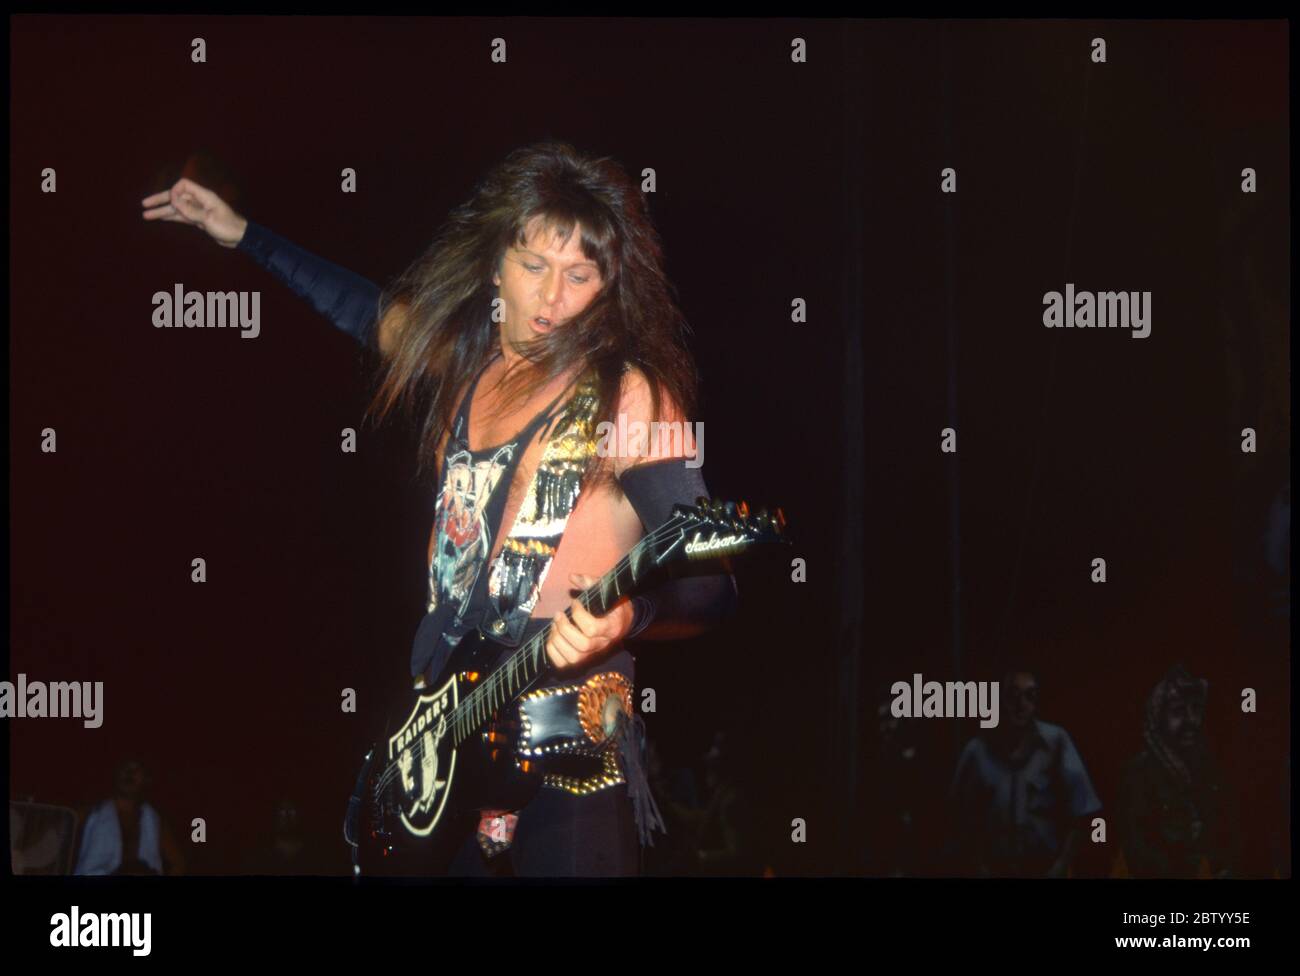 W.A.S.P. performing live at The Santa Monica Civic Auditorium in Santa Monica, CA USA on August 8, 1989.  Credit: Kevin Estrada / MediaPunch Stock Photo